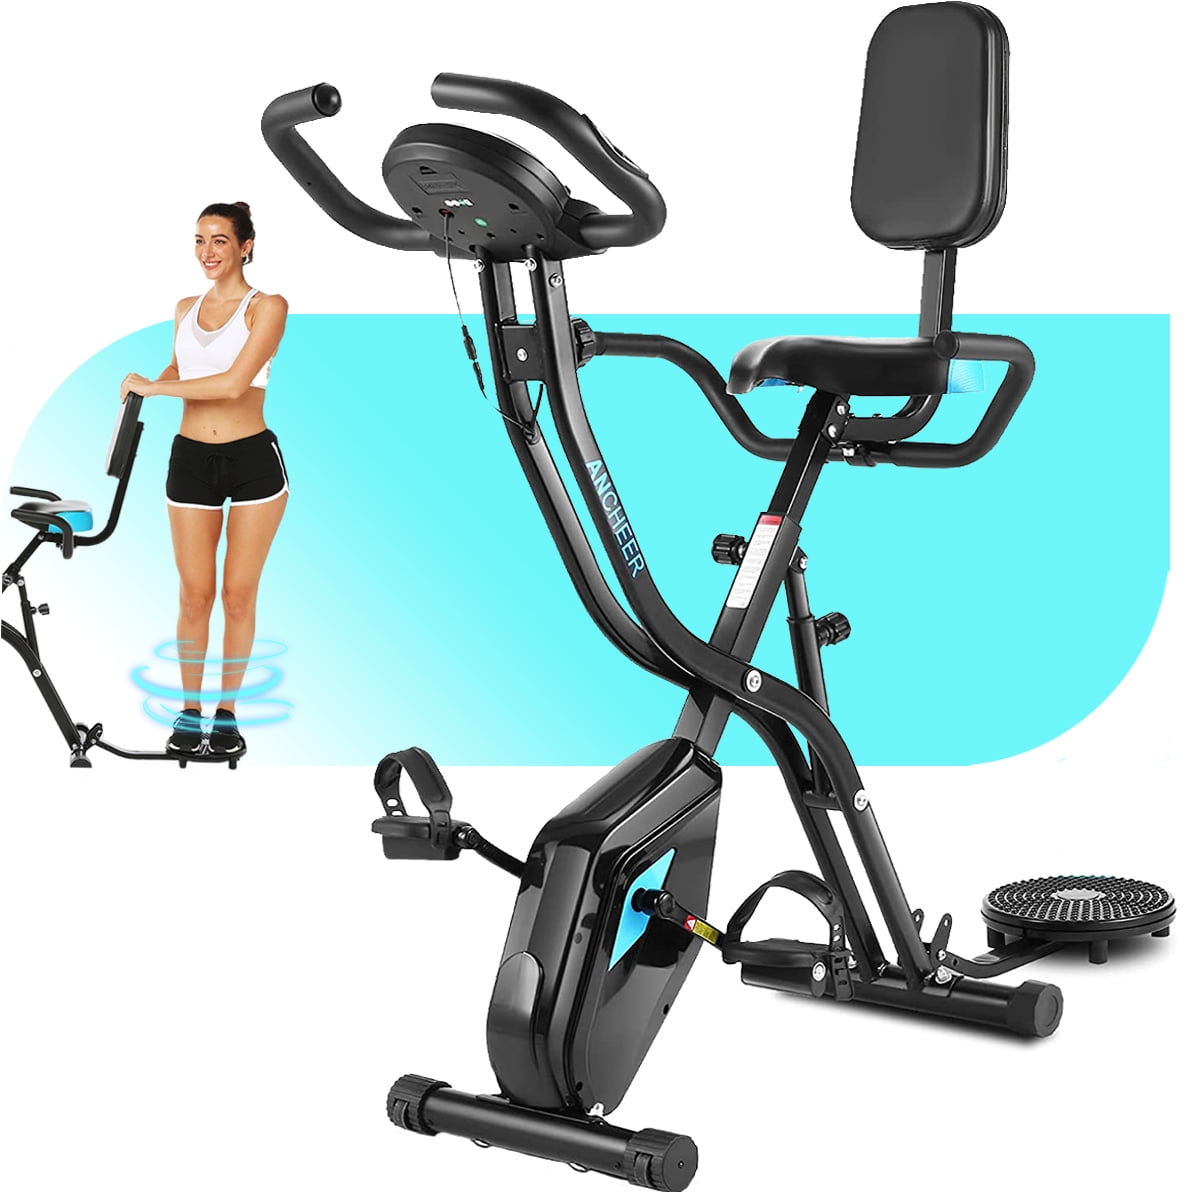 ANCHEER Indoor Exercise Slim Folding Bike 3-in-1 Home Stationary Magnetic Cycle" 